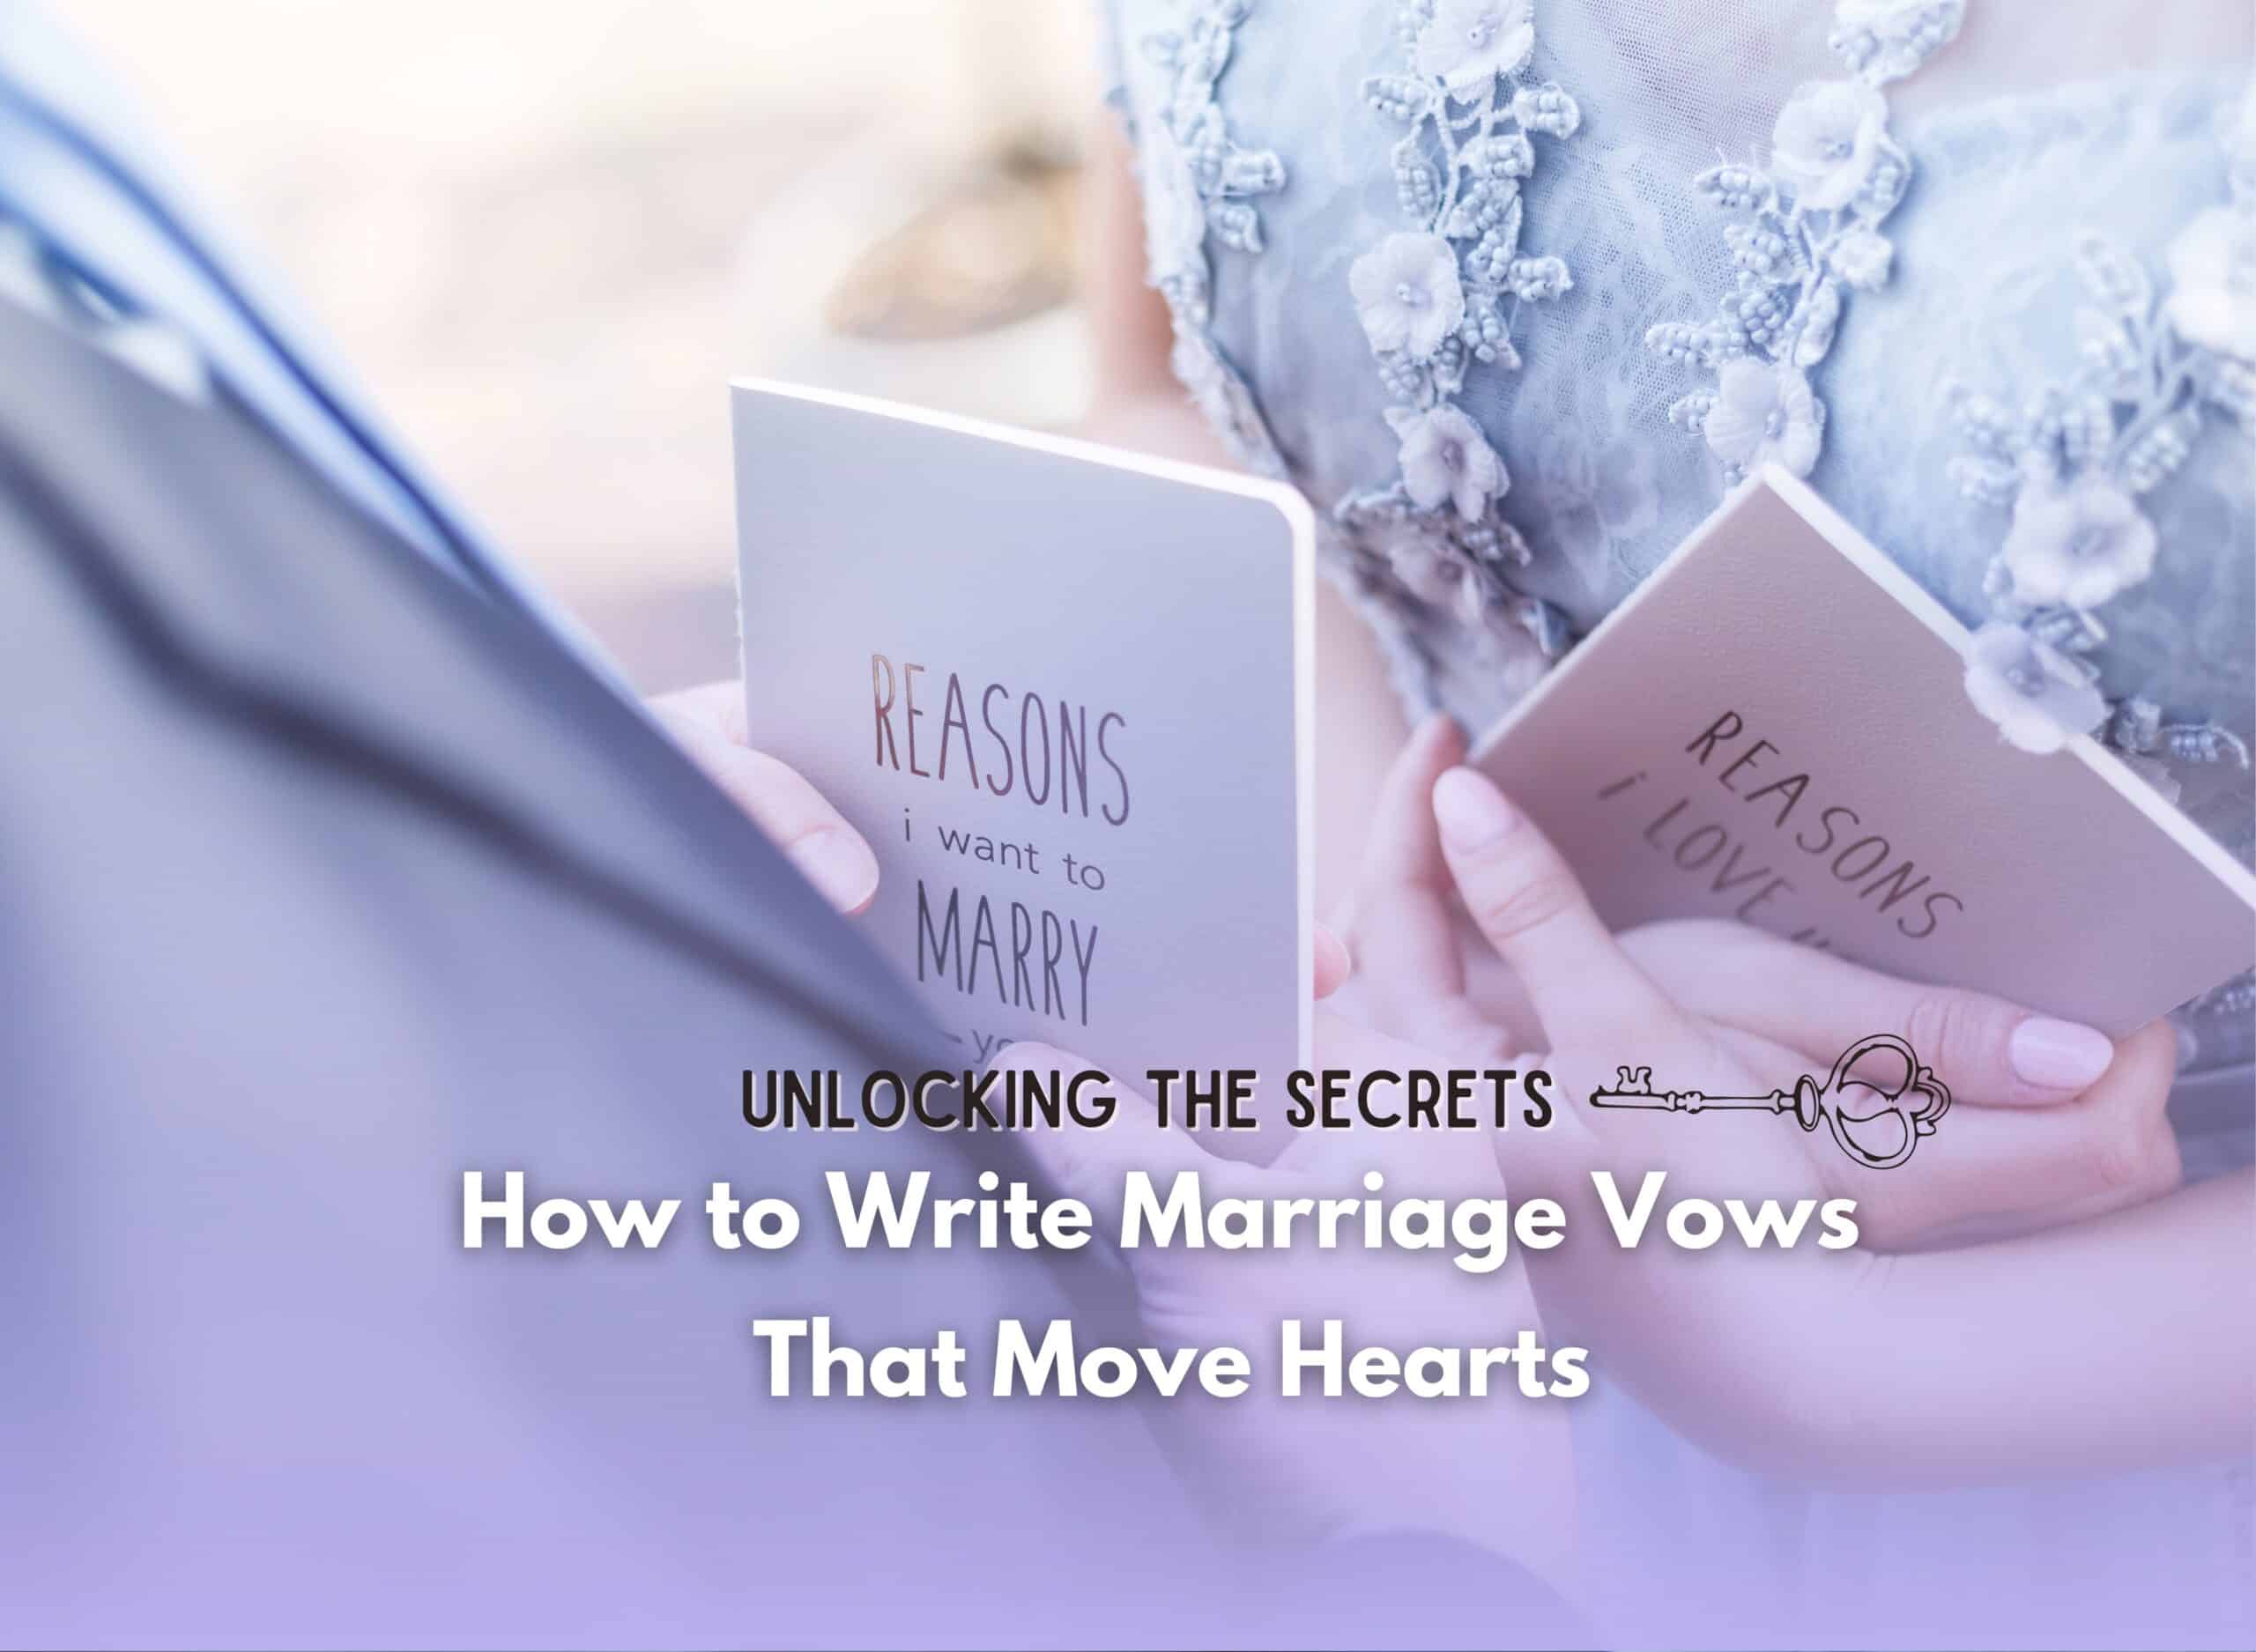 How To Write Marriage Vows That Move Hearts Scaled - How To Write Marriage Vows | Cubebik Blog